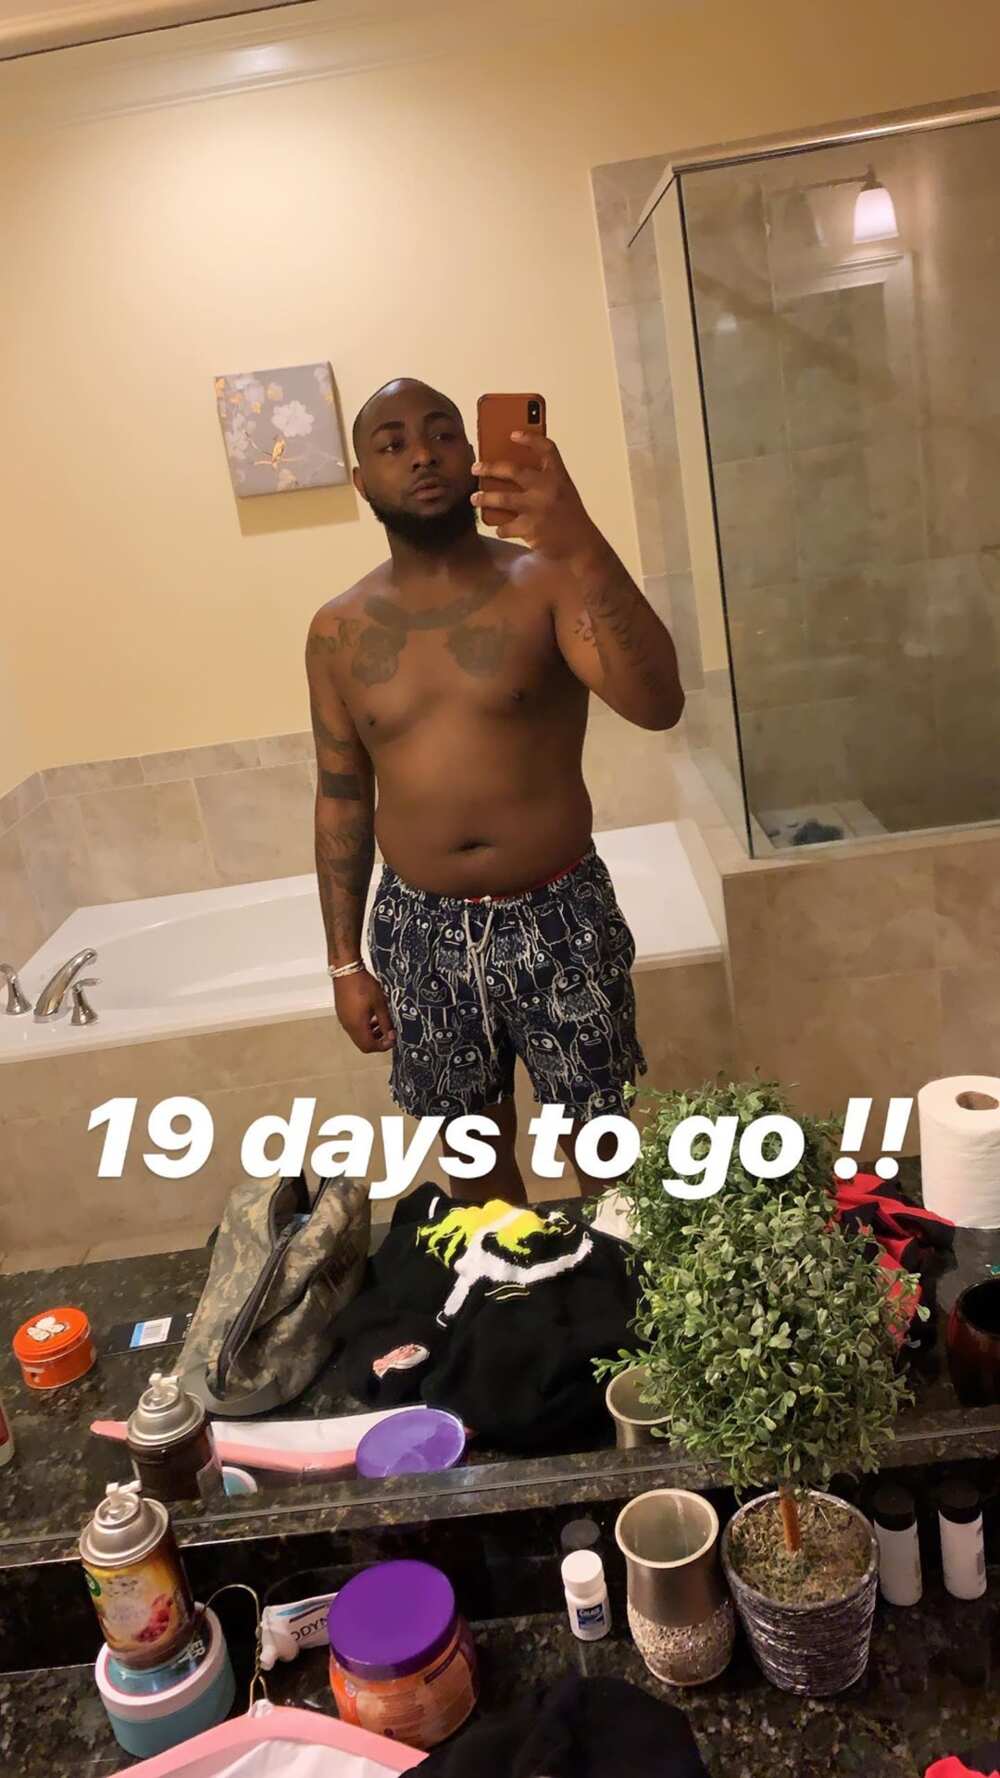 Davido works out hard to lose belly fat (photos)